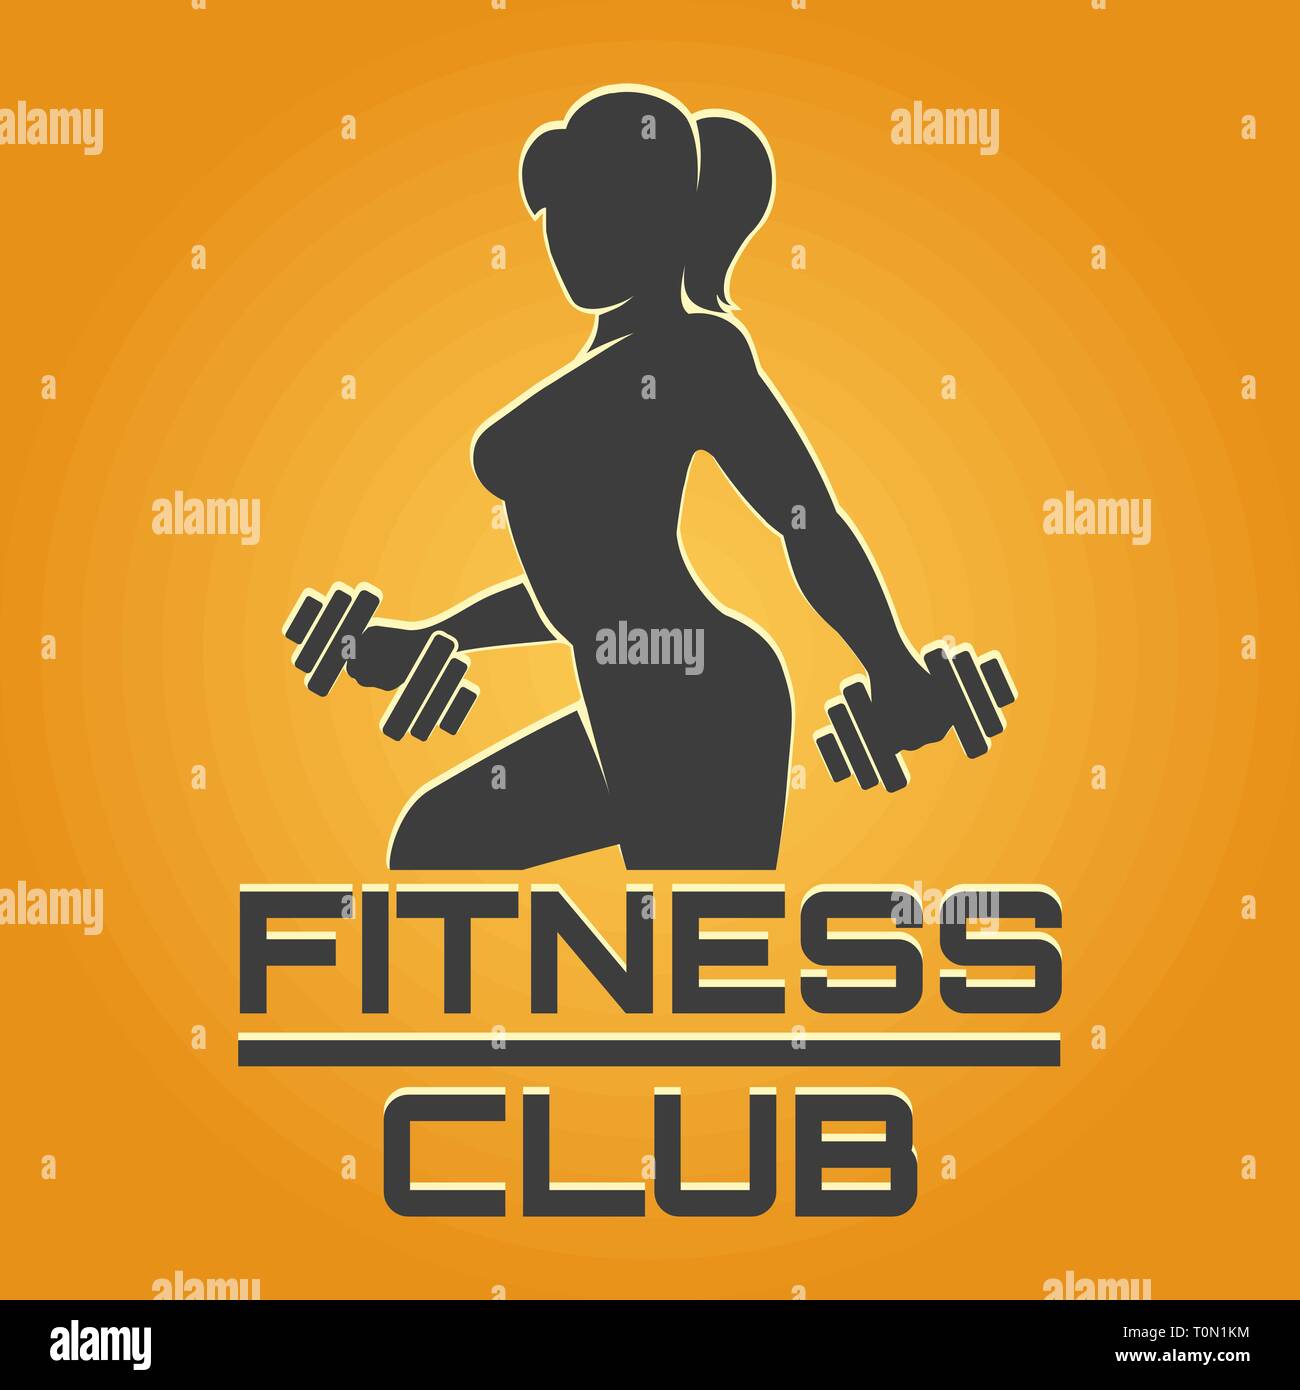 Fitness club or gym design template. Silhouette of athletic woman with dumbbells. Vector illustration. Stock Vector